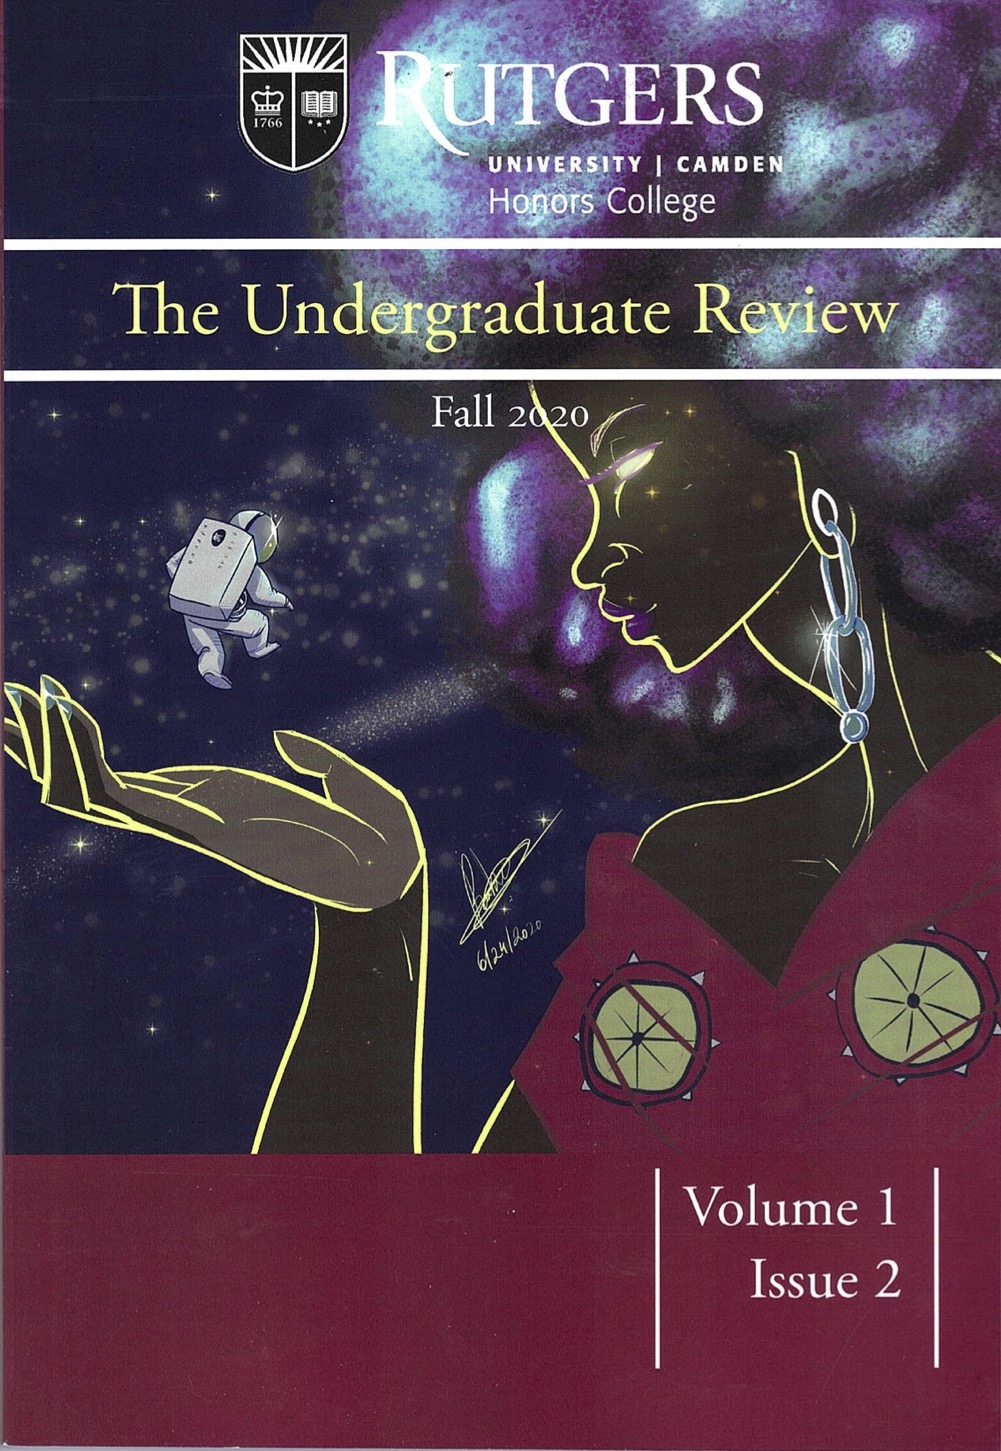 					View Vol. 1 No. 2 (2020): The Undergraduate Review - Fall 2020
				